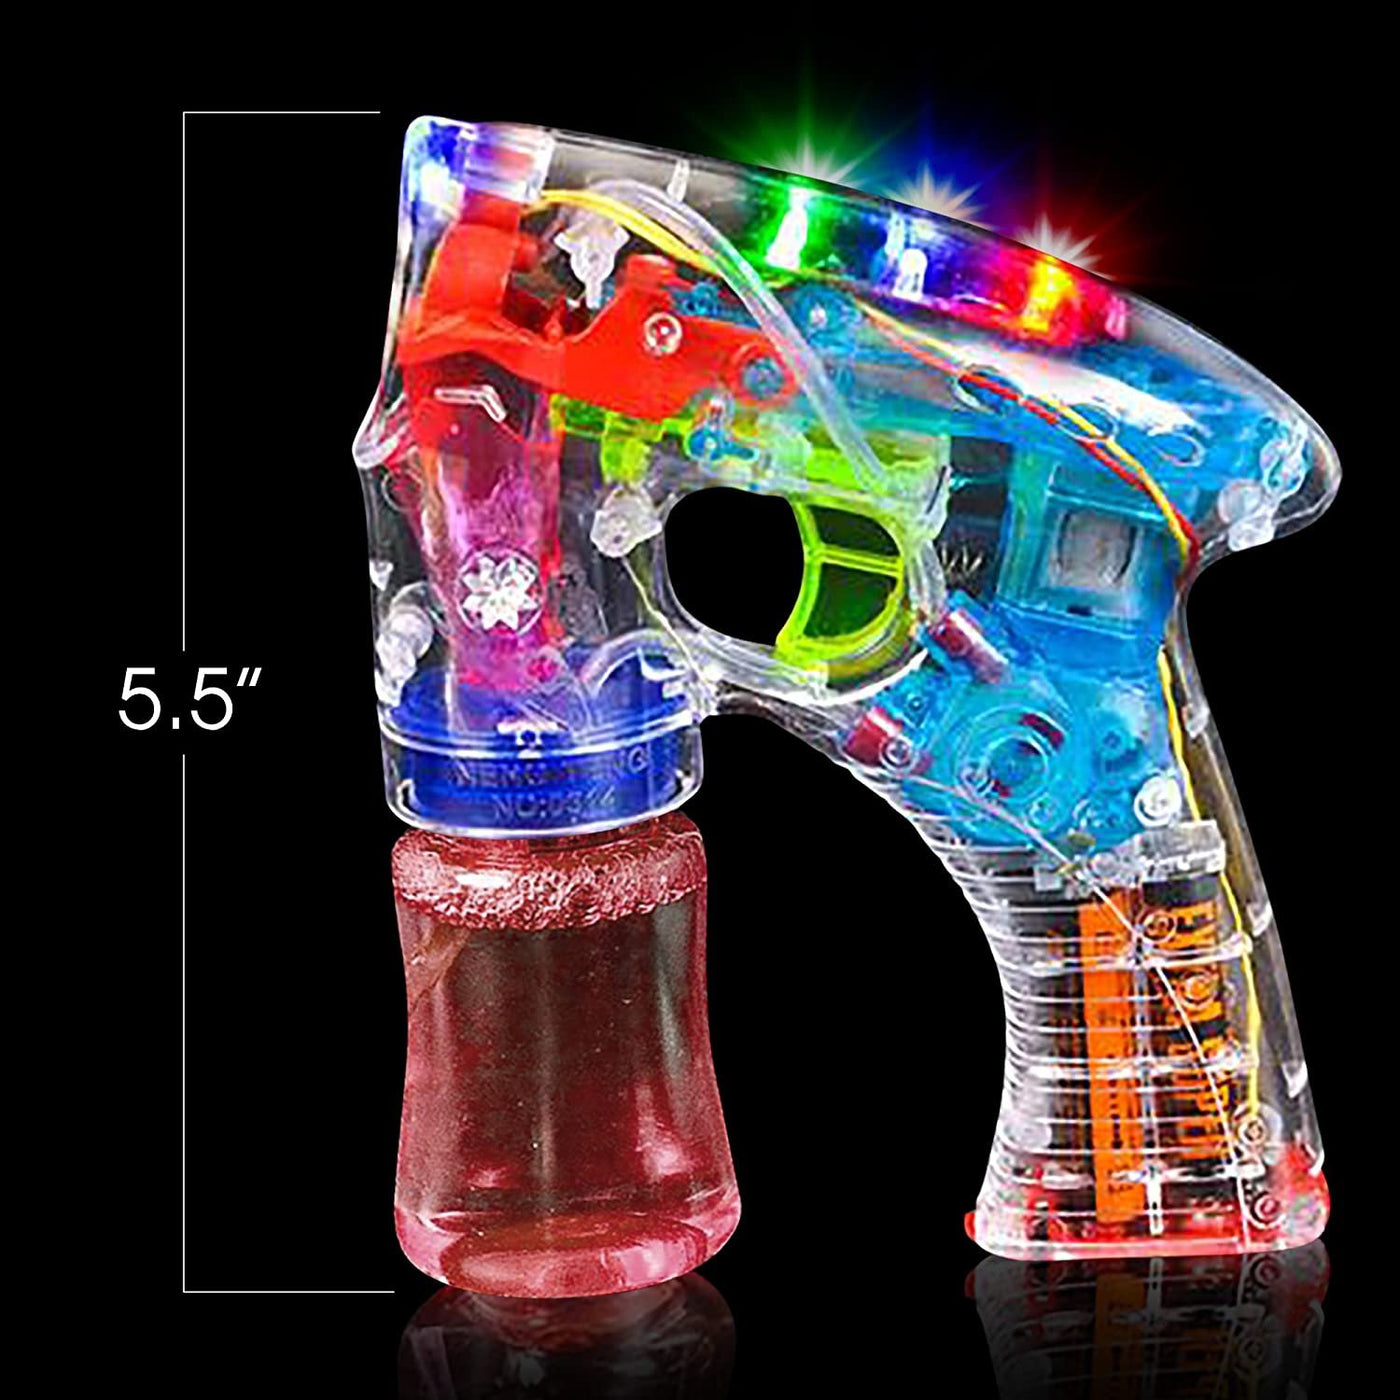 Friction Powered Bubble Gun Toy Light-Up Shoots Bubbles Fun Outdoor  Activity